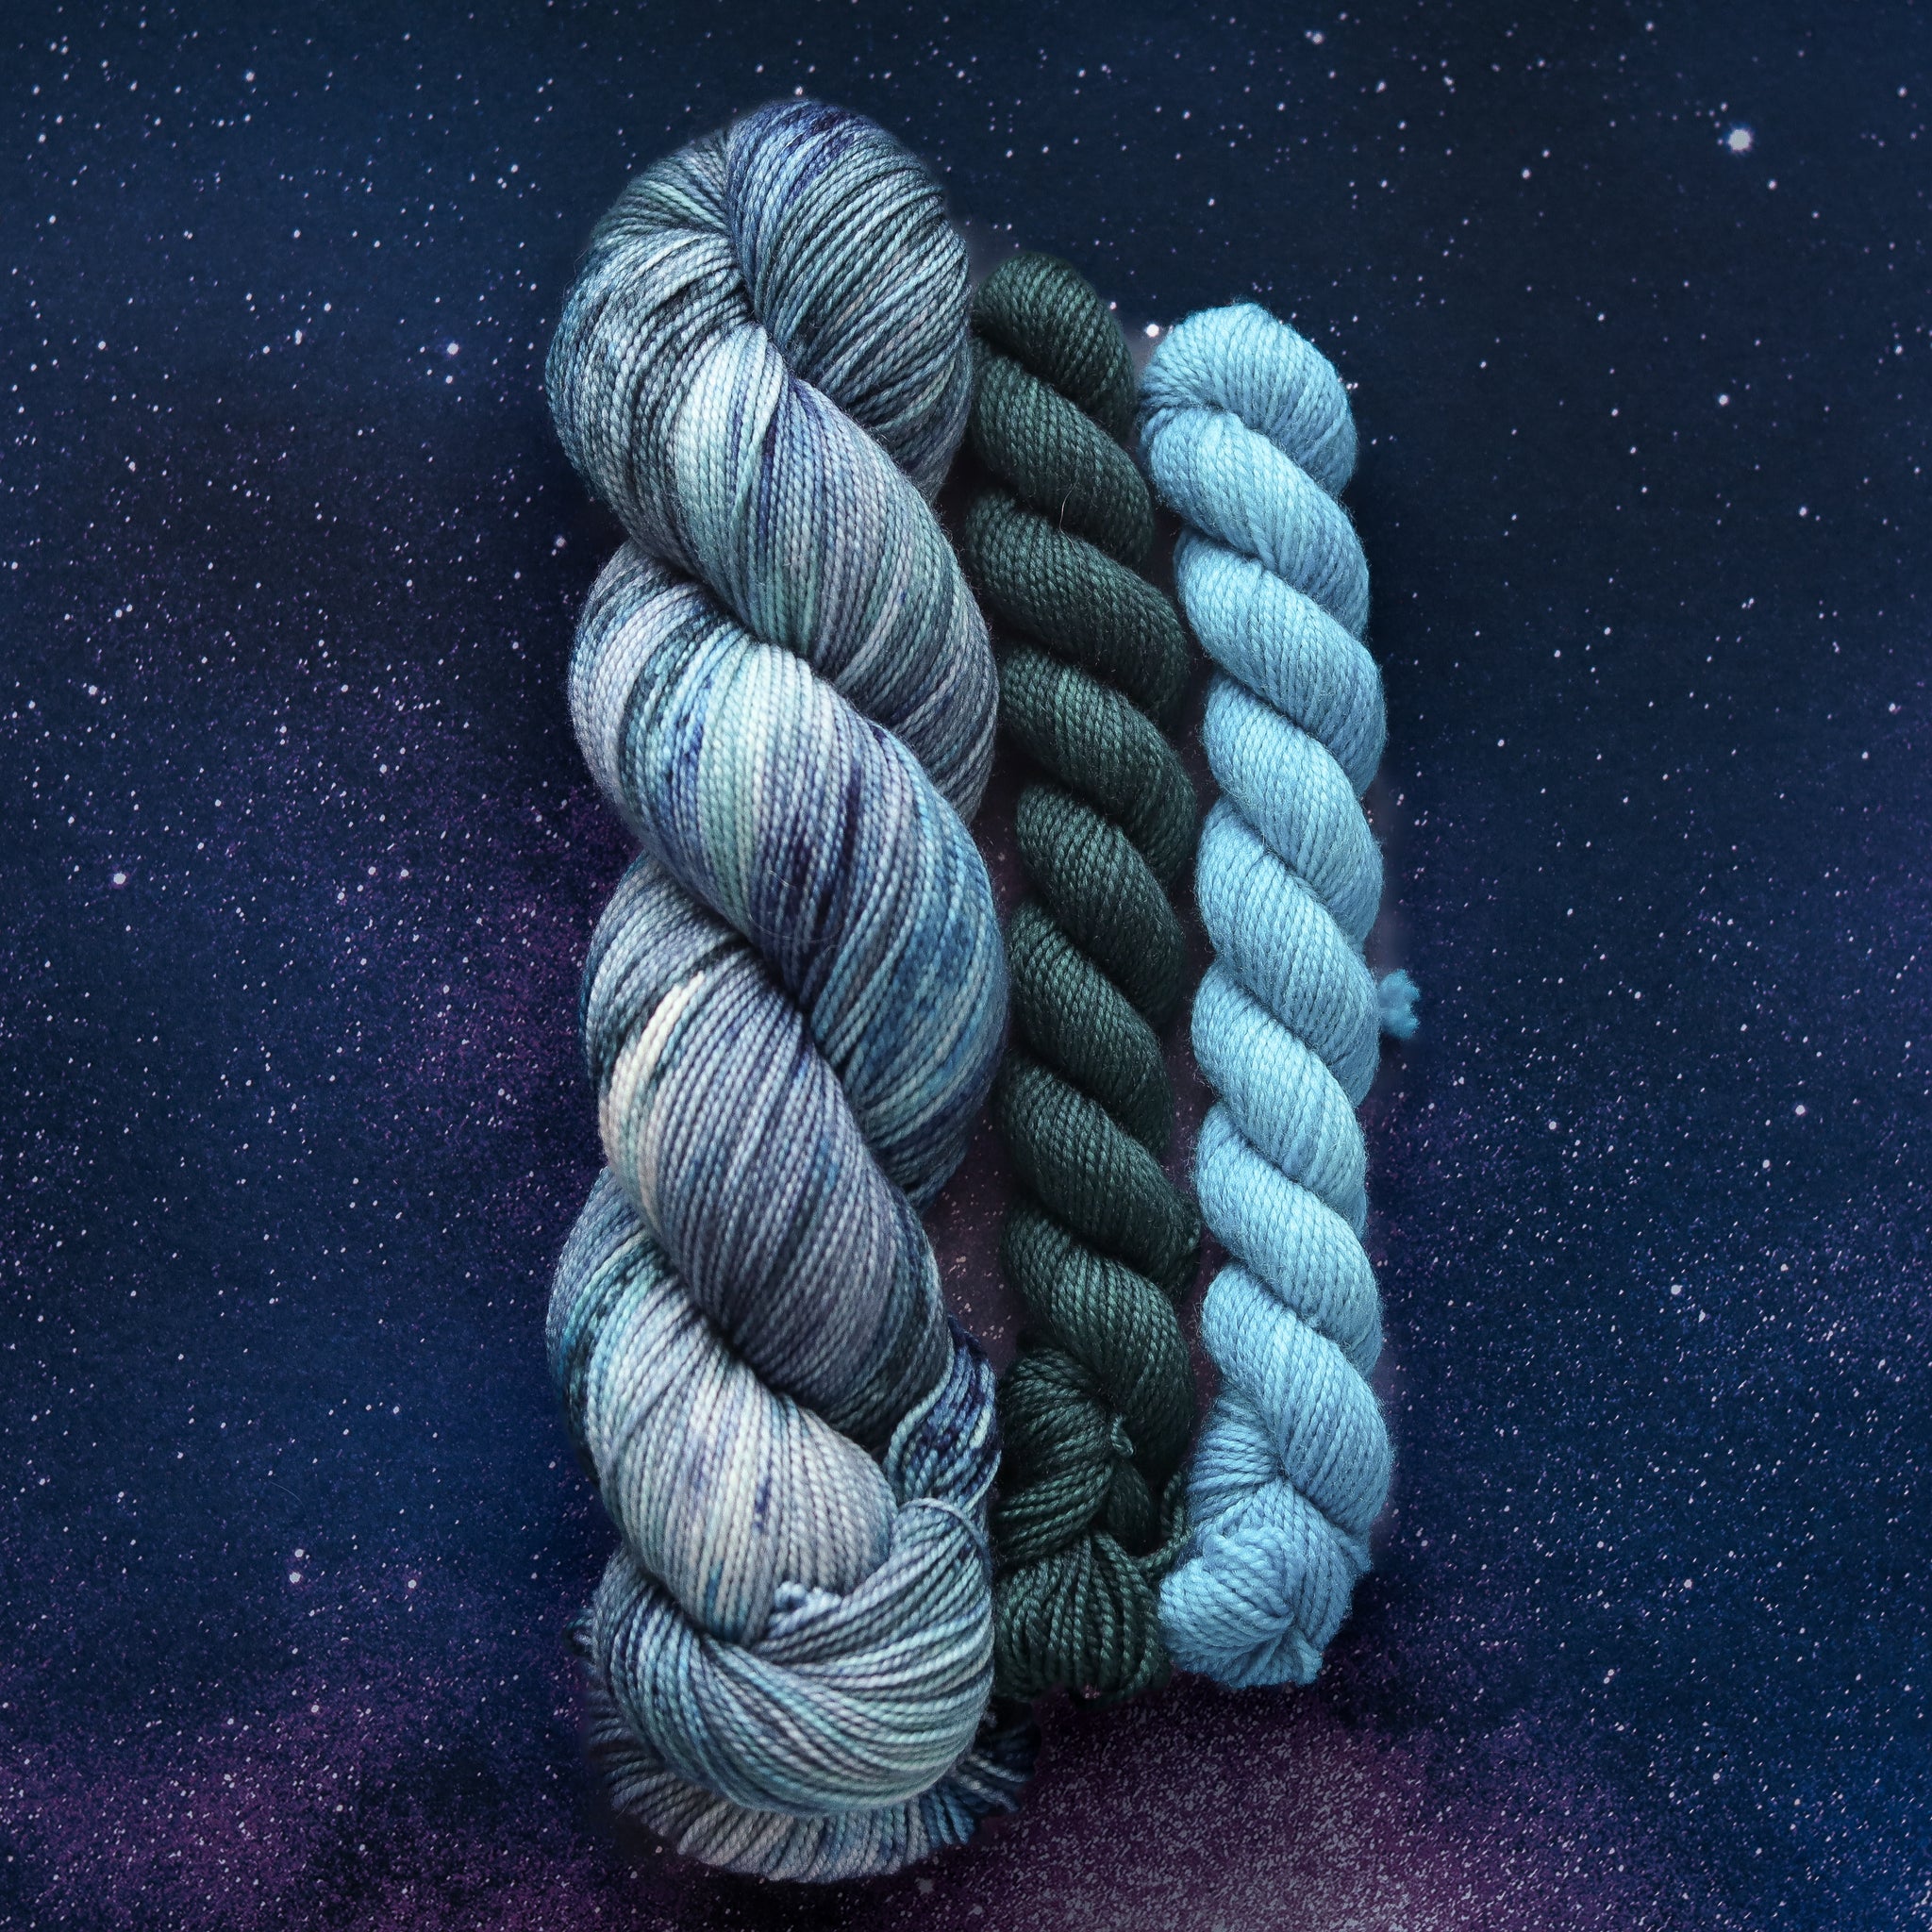 It's Been A Long Road | 2022 Star Trek Yarn Collection